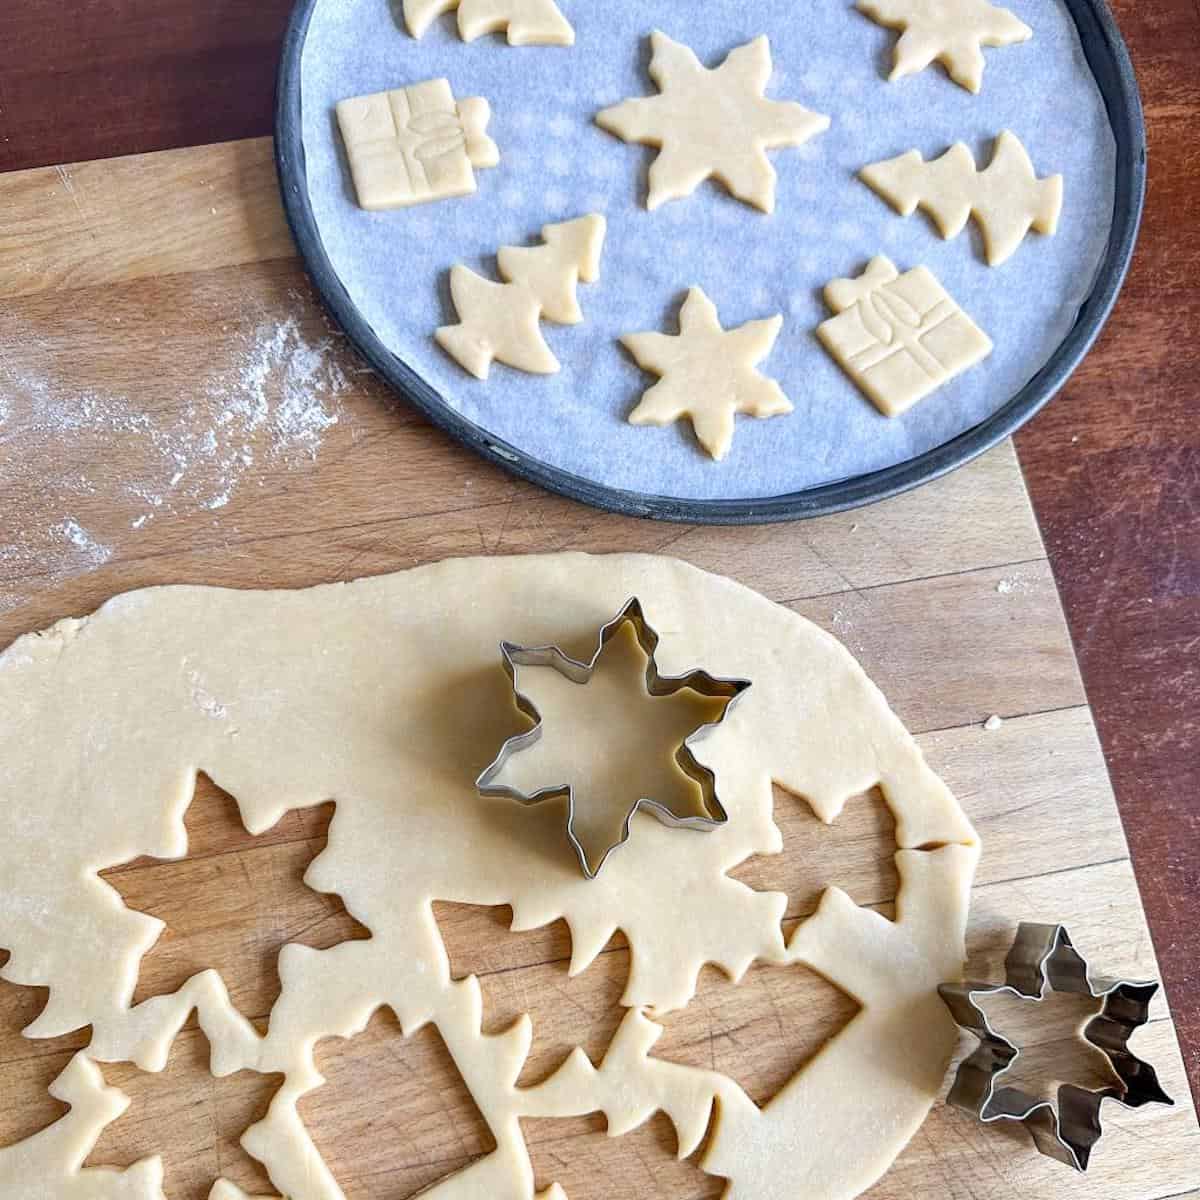 Sweet shortcrust pastry rolled out on a kitchen surface, with cookie cutters and a tray of cookies ready to be baked. 